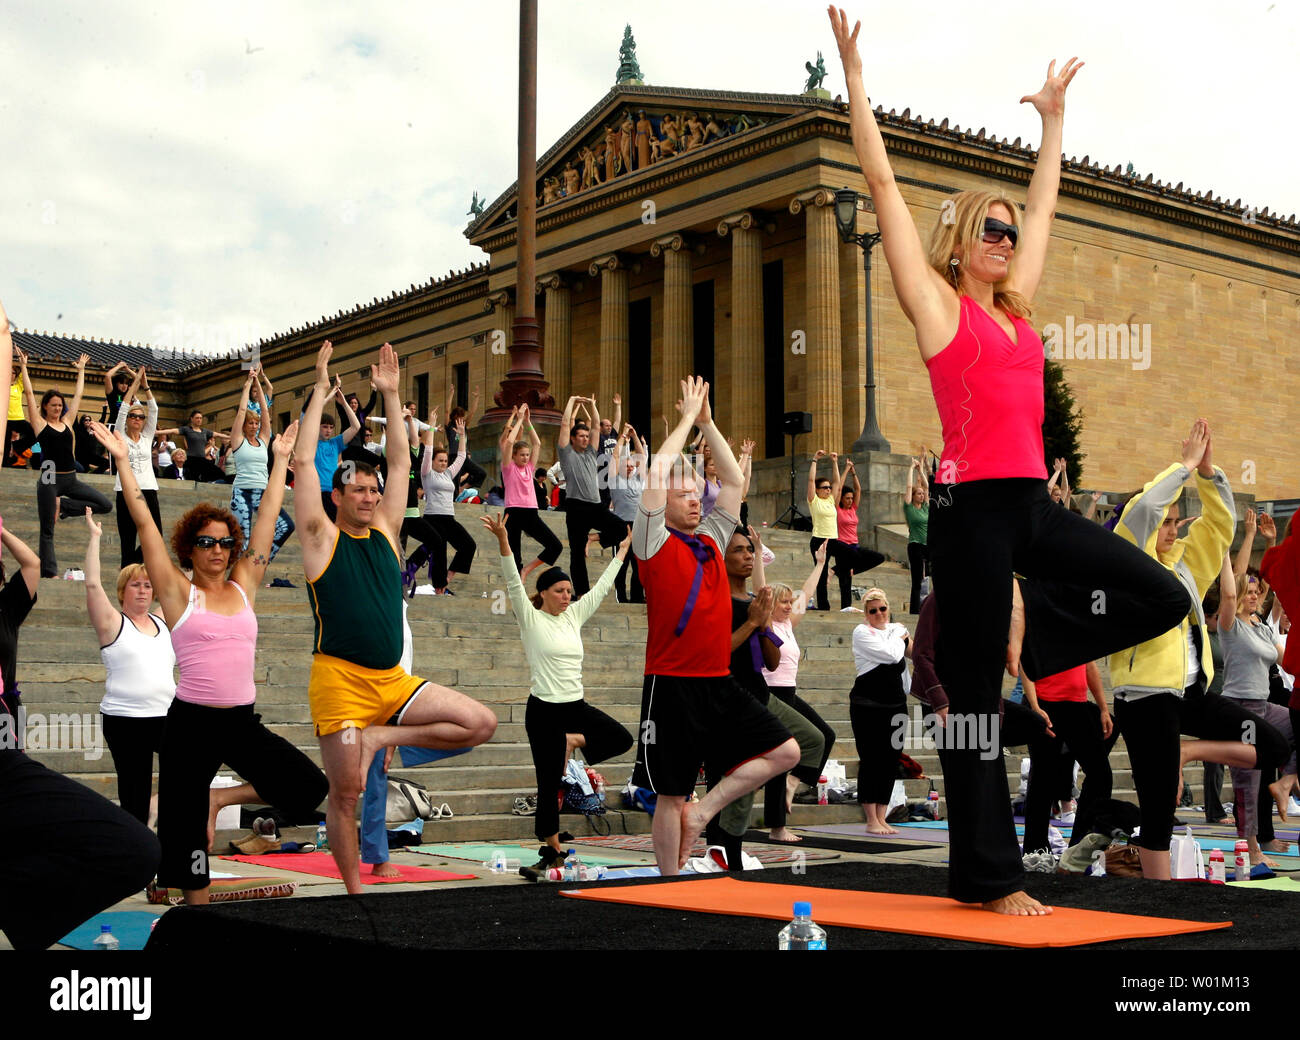 Jennifer Schelter (far right)  leads some 600 breast cancer survivors and their families through yoga exercises on the steps of the Philadelphia Art Museum in downtown Philadelphia May 20 2007. They participate in the the mass yoga class annually to raise funds and awareness of breast cancer  issues.  (UPI Photo/John Anderson) Stock Photo